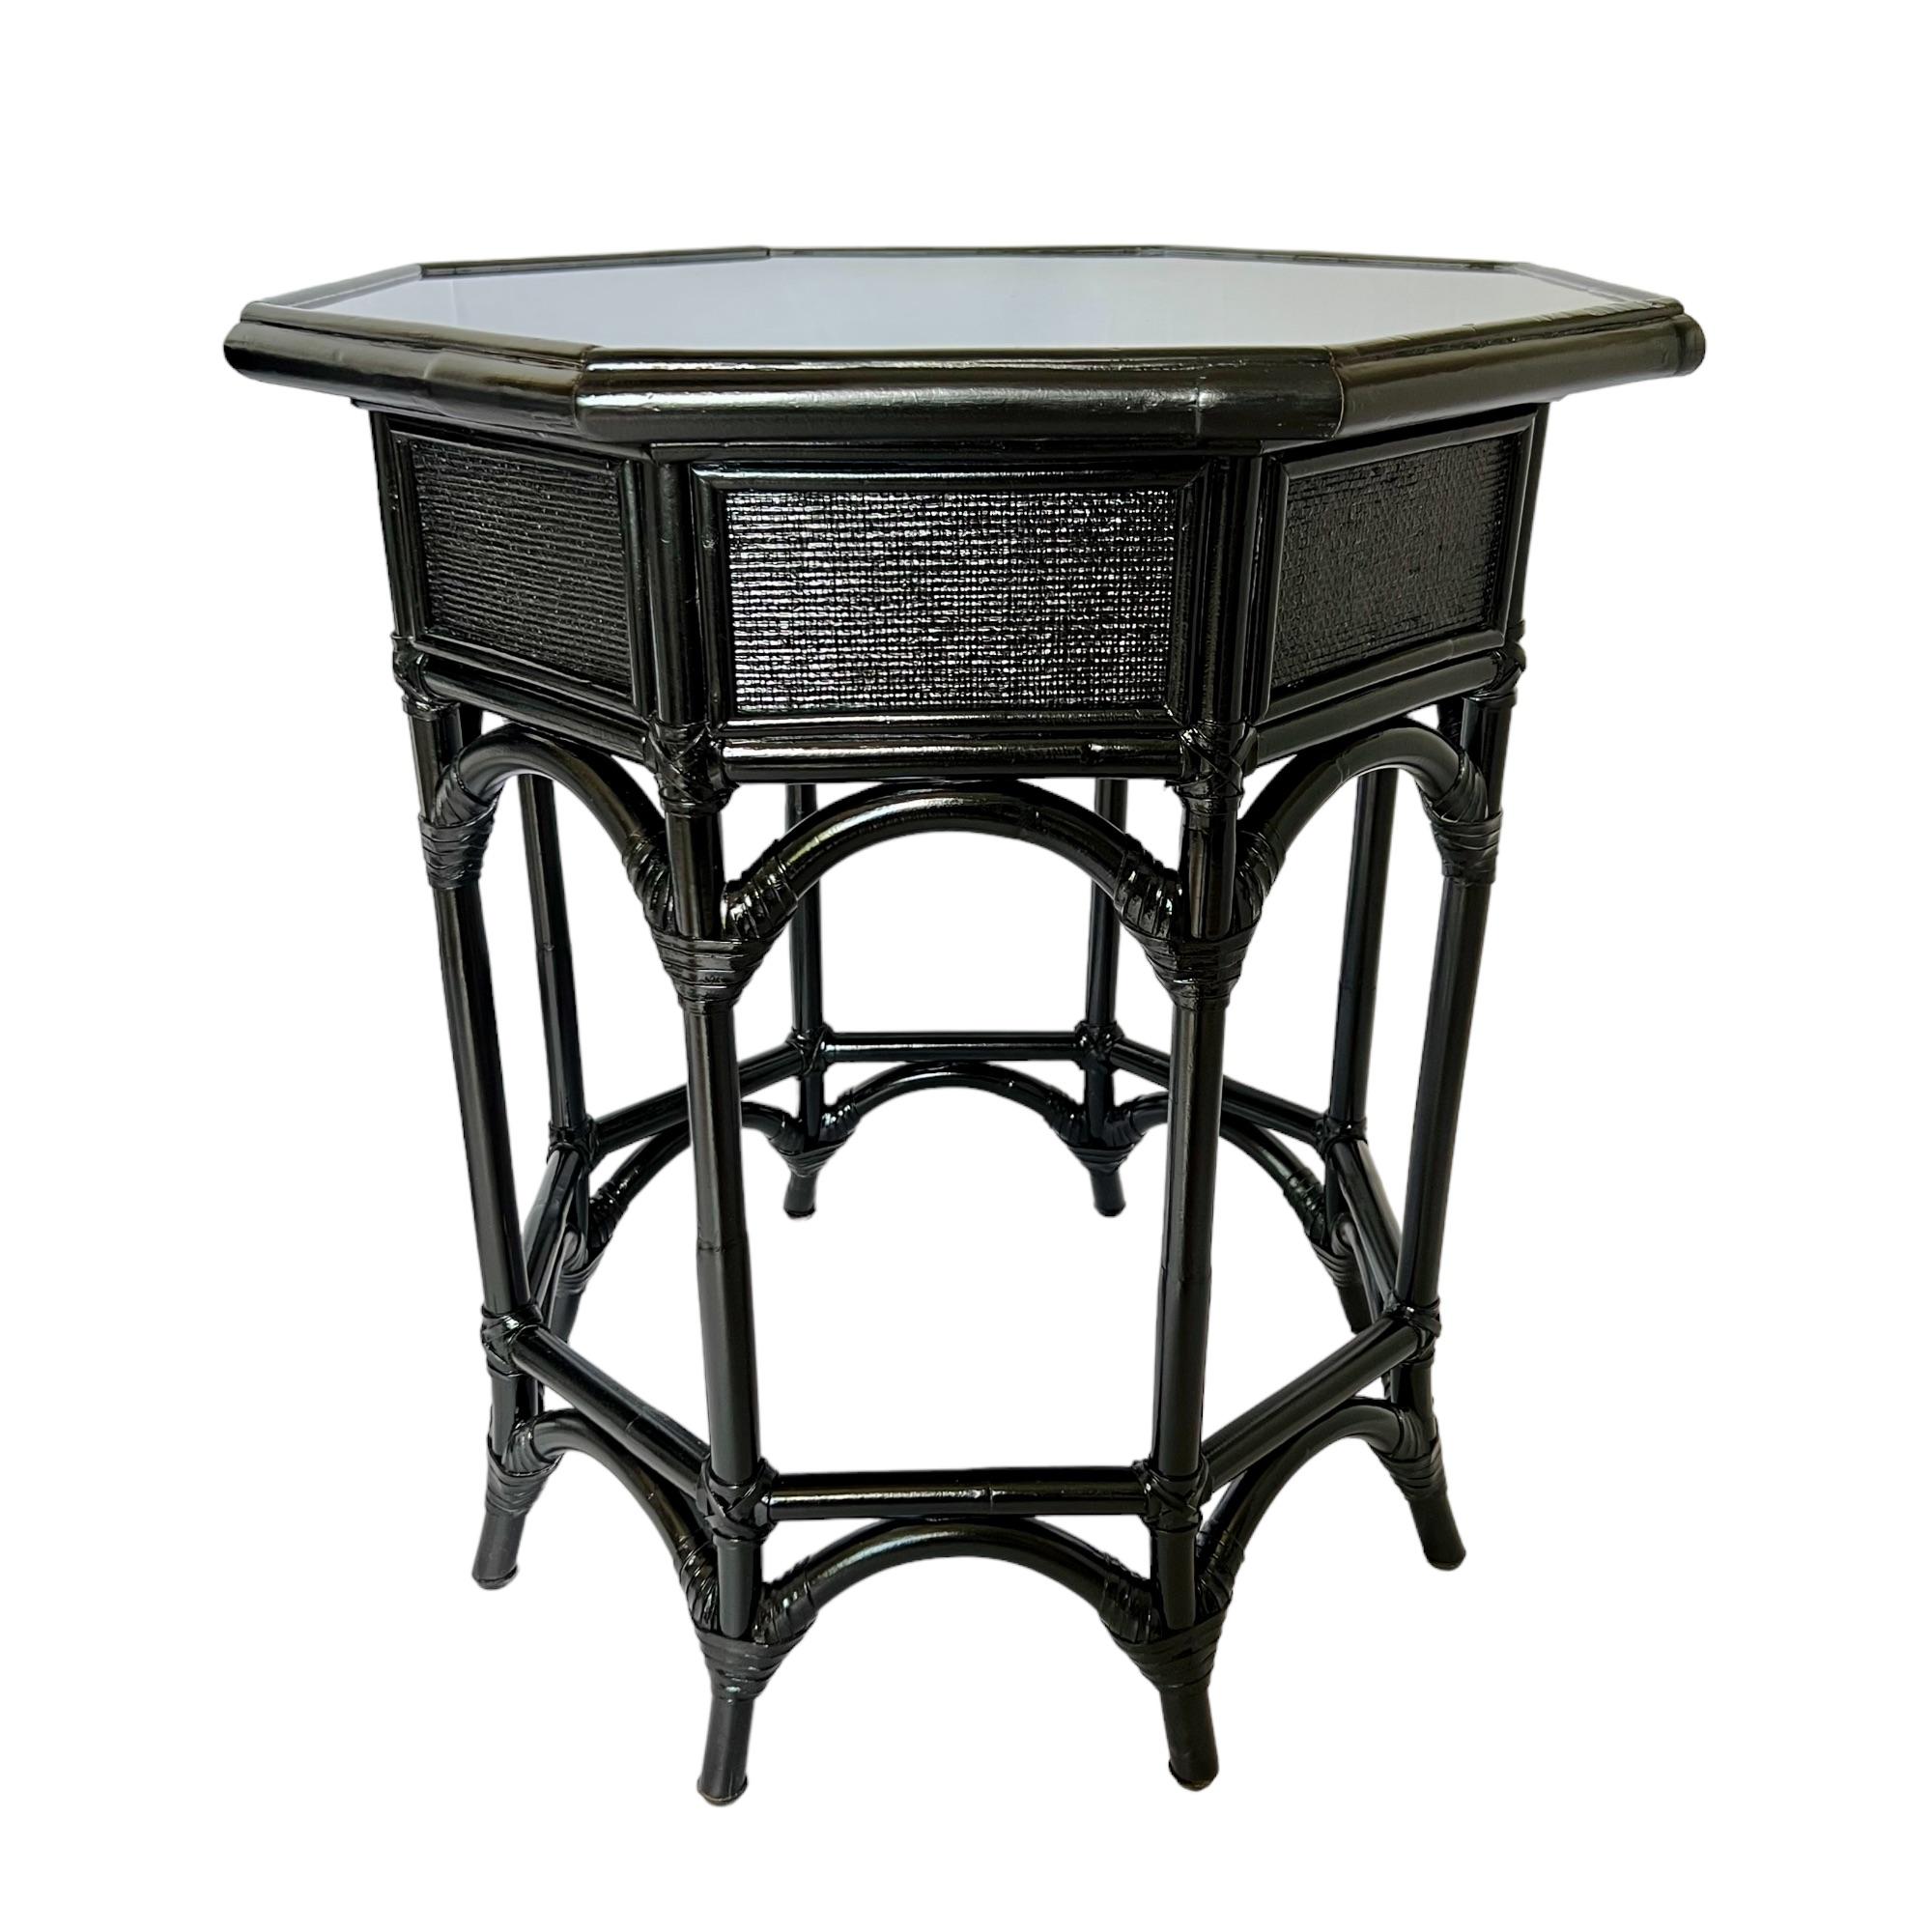 Late 20th Century Vintage Refinished Black Rattan Resin Top Octagon Side Tables, a Pair For Sale